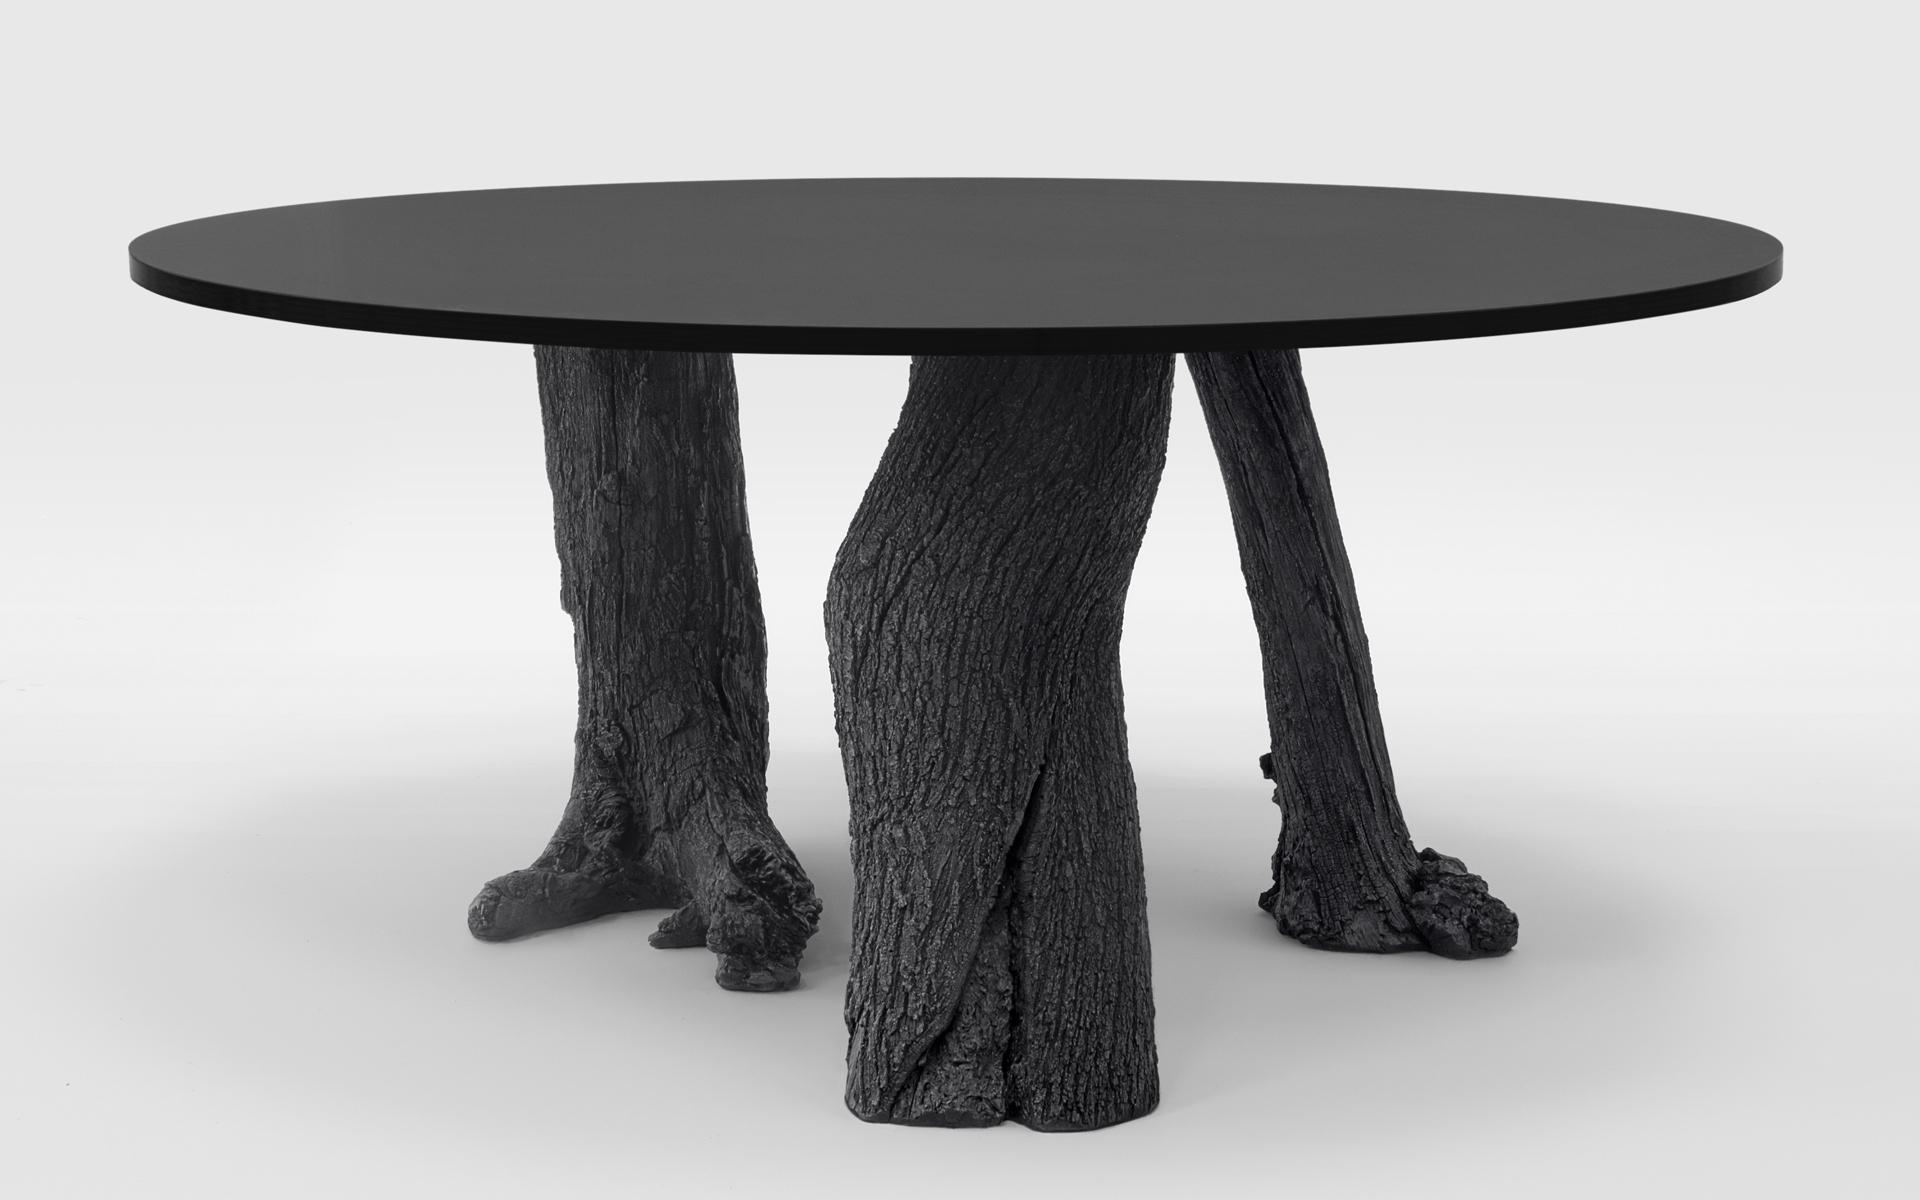 Antipode table by Imperfettolab
Dimensions: 159 H 74 cm
Materials: Fiberglass

Imperfetto Lab
Who we are ? We are a family.
Verter Turroni, Emanuela Ravelli and our children Elia, Margherita and Eusebio.
All together, we are separate parts